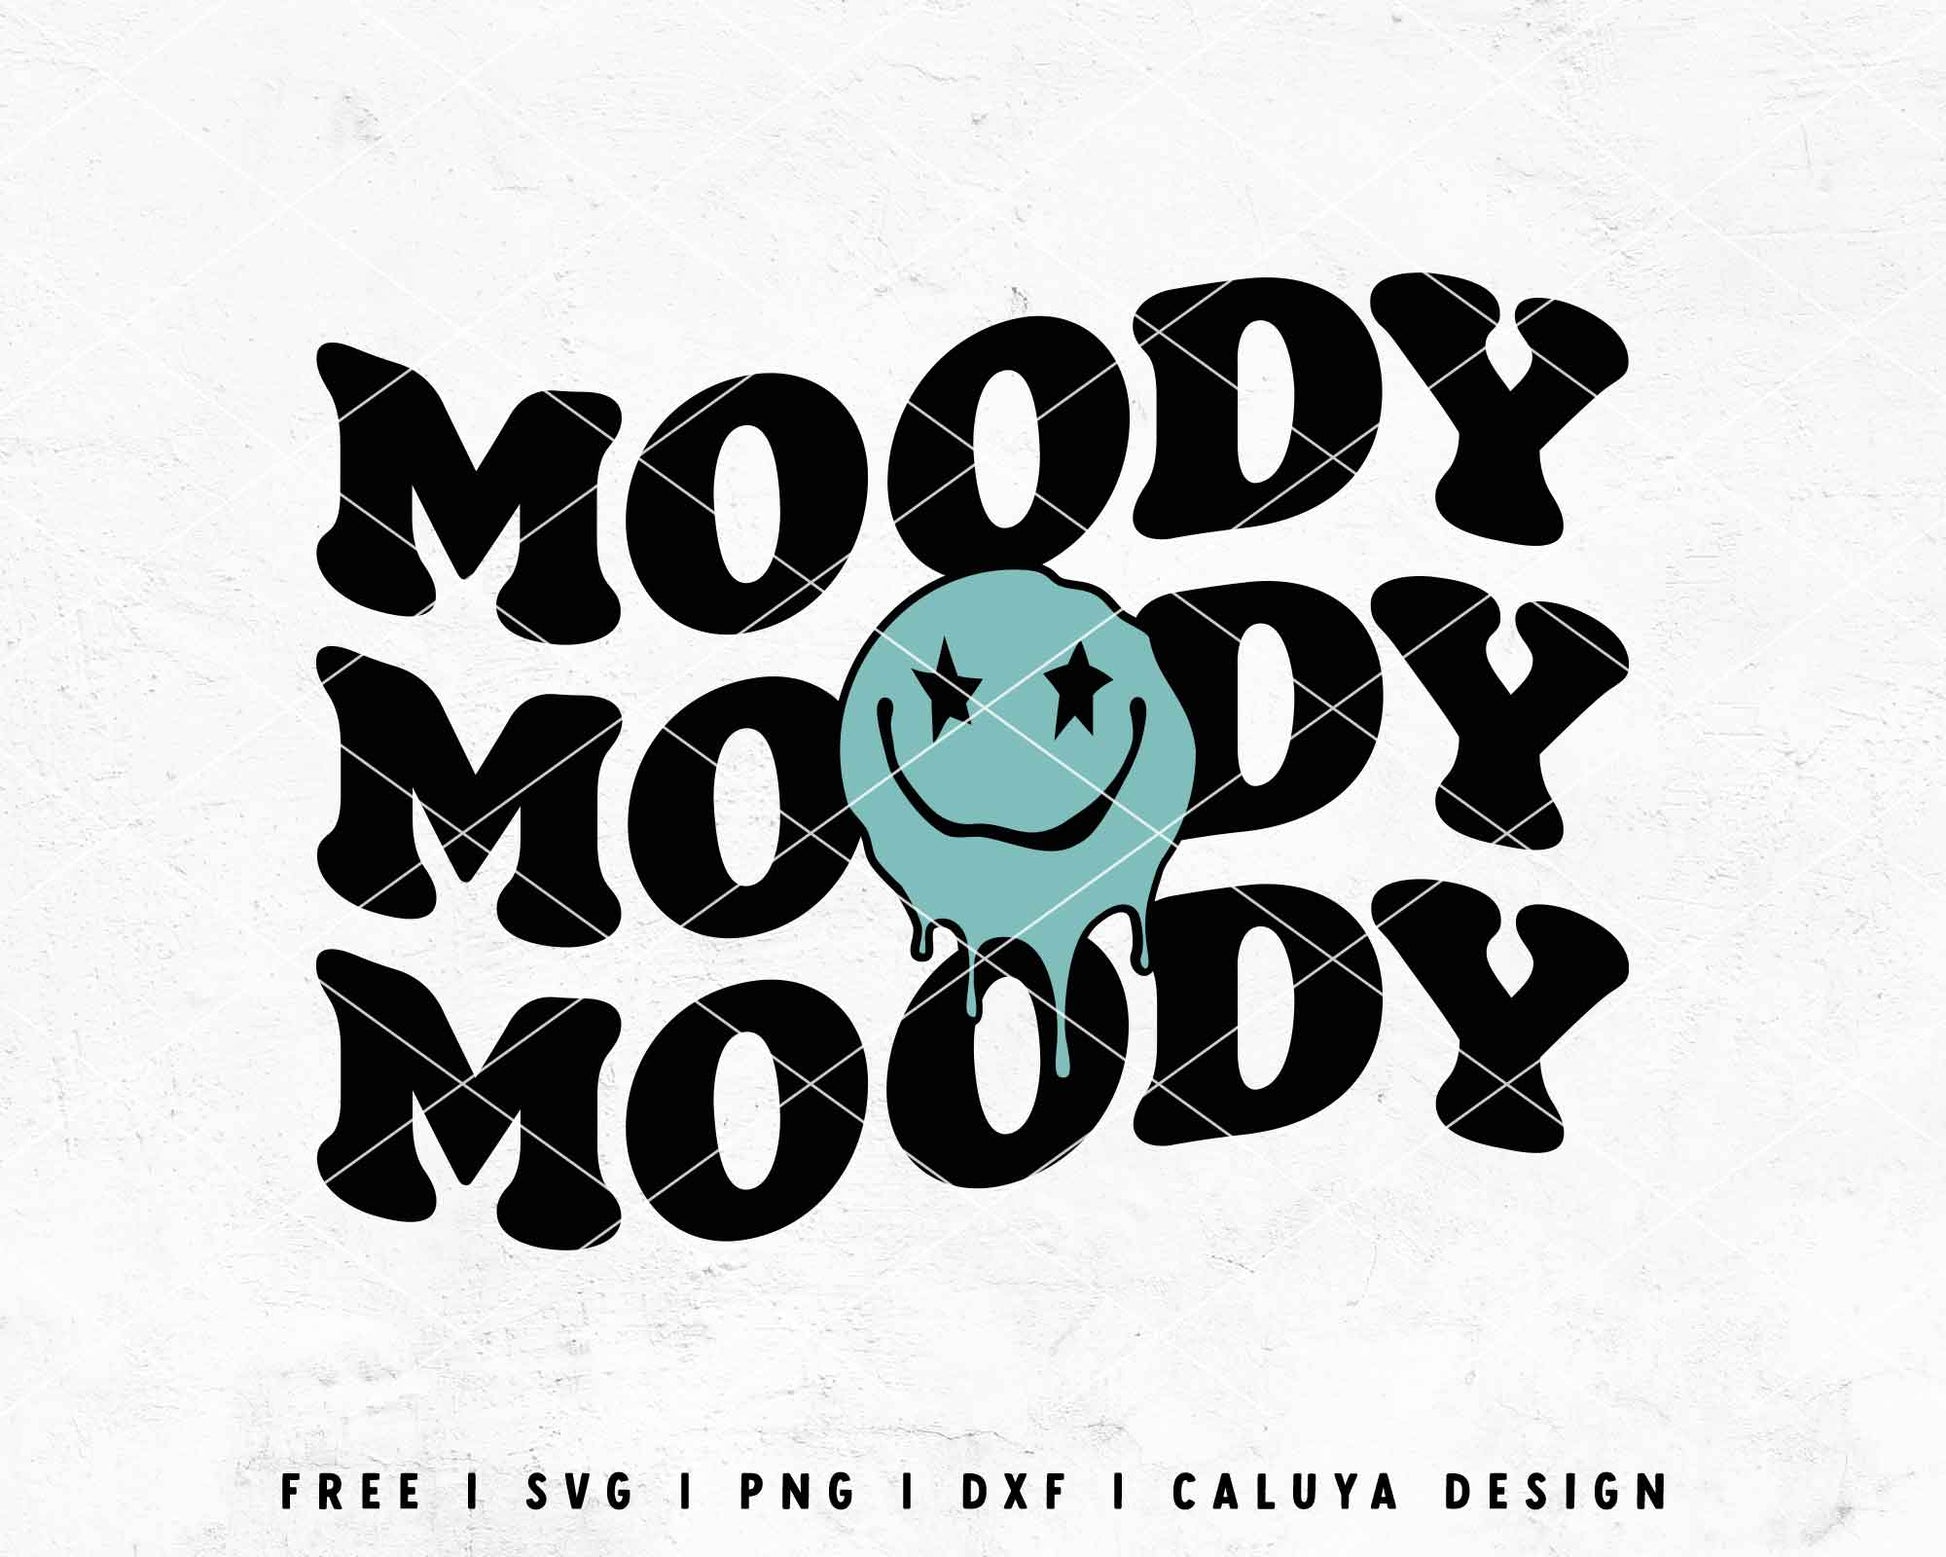 FREE Moody SVG | Aesthetic SVG | Smiley Face SVG Cut File for Cricut, Cameo Silhouette | Free SVG Cut File